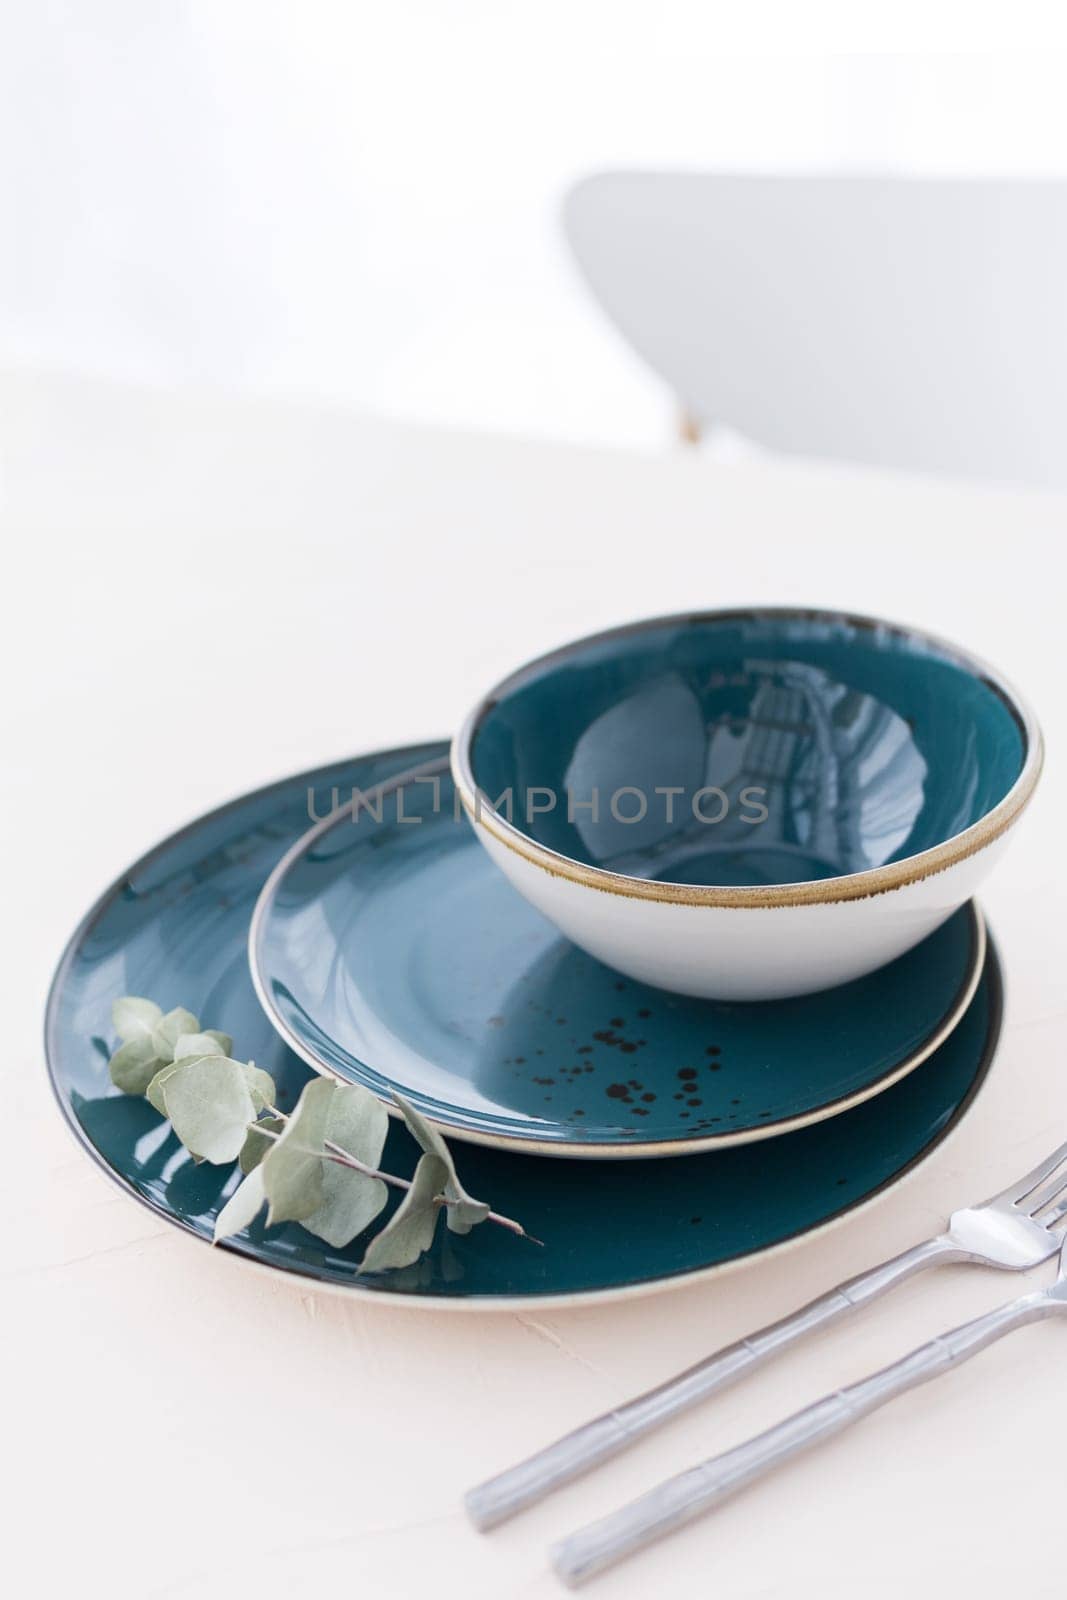 Three empty green plates with silver cutlery on white table in front of window. Set of three various plates on table. Minimal style table setting